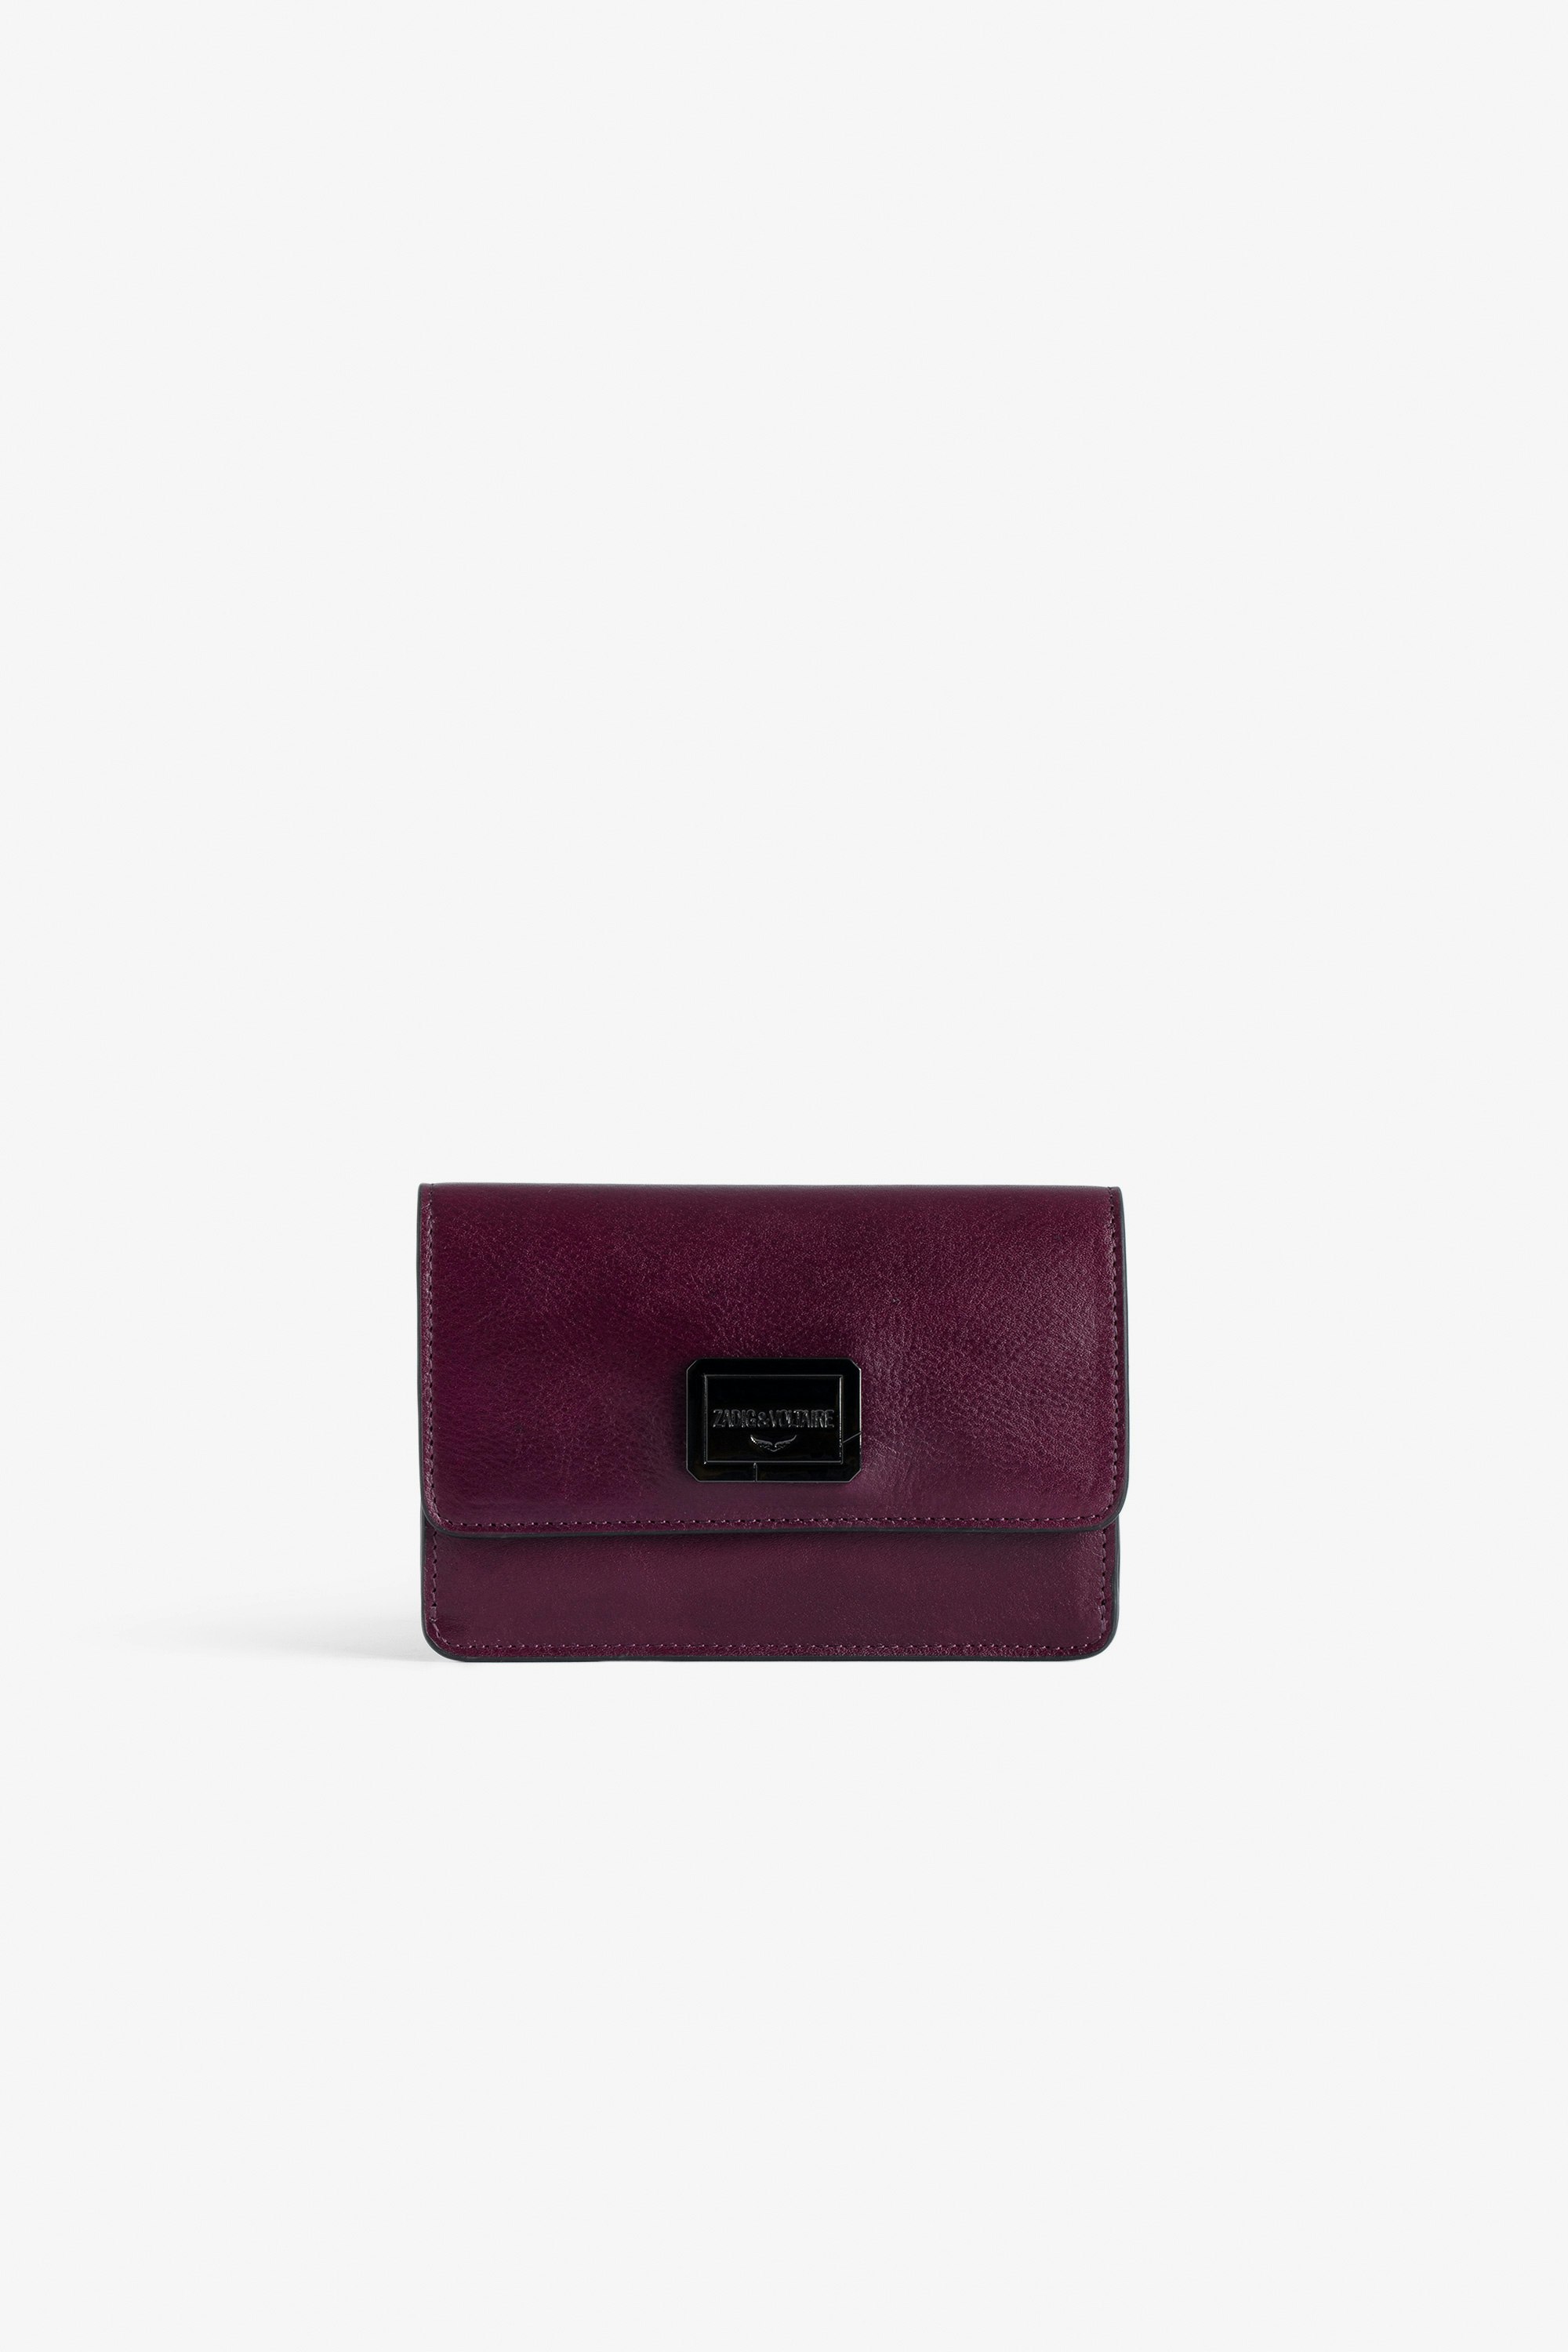 Le Cecilia Wallet - Women’s burgundy leather wallet with flap